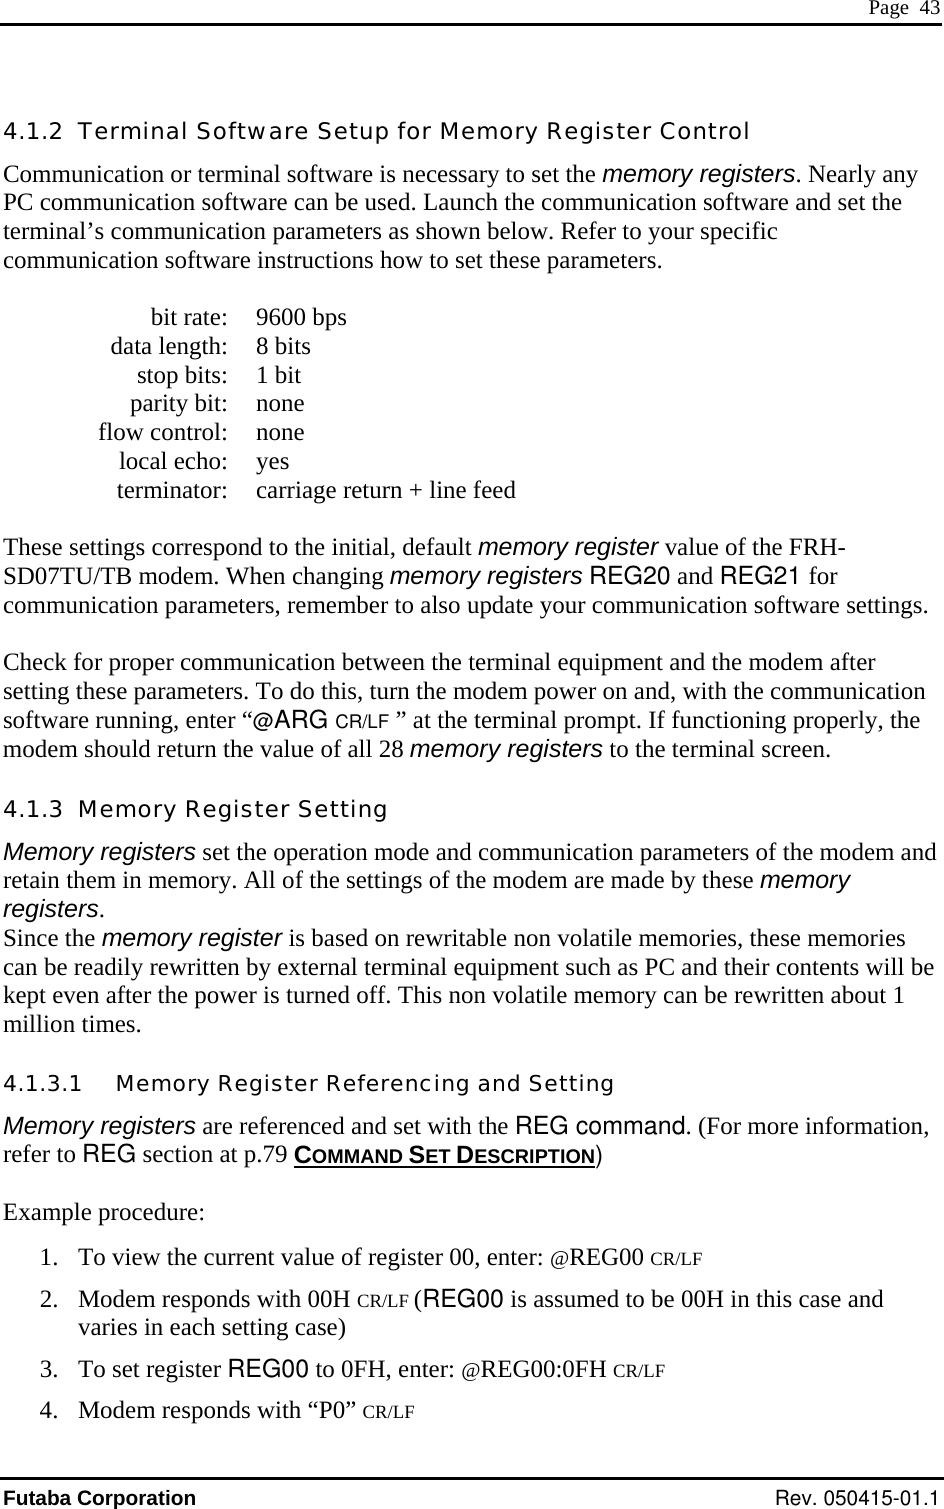  Page  43 4.1.2  Terminal Software Setup for Memory Register Control Communication or terminal software is necessary to set the memory registers. Nearly any PC communication software can be used. Launch the communication software and set the terminal’s communication parameters as shown below. Refer to your specific communication software instructions how to set these parameters.    bit rate:  9600 bps   data length:  8 bits   stop bits:  1 bit  parity bit: none  flow control: none  local echo: yes   terminator:  carriage return + line feed  These settings correspond to the initial, default memory register value of the FRH-SD07TU/TB modem. When changing memory registers REG20 and REG21 for communication parameters, remember to also update your communication software settings.  Check for proper communication between the terminal equipment and the modem after setting these parameters. To do this, turn the modem power on and, with the communication software running, enter “@ARG CR/LF  ” at the terminal prompt. If functioning properly, the modem should return the value of all 28 memory registers to the terminal screen. 4.1.3  Memory Register Setting Memory registers set the operation mode and communication parameters of the modem and retain them in memory. All of the settings of the modem are made by these memory registers. Since the memory register is based on rewritable non volatile memories, these memories can be readily rewritten by external terminal equipment such as PC and their contents will be kept even after the power is turned off. This non volatile memory can be rewritten about 1 million times. 4.1.3.1   Memory Register Referencing and Setting Memory registers are referenced and set with the REG command. (For more information, refer to REG section at p.79 COMMAND SET DESCRIPTION)  Example procedure: 1.  To view the current value of register 00, enter: @REG00 CR/LF 2.  Modem responds with 00H CR/LF (REG00 is assumed to be 00H in this case and varies in each setting case) 3.  To set register REG00 to 0FH, enter: @REG00:0FH CR/LF 4.  Modem responds with “P0” CR/LF Futaba Corporation Rev. 050415-01.1 